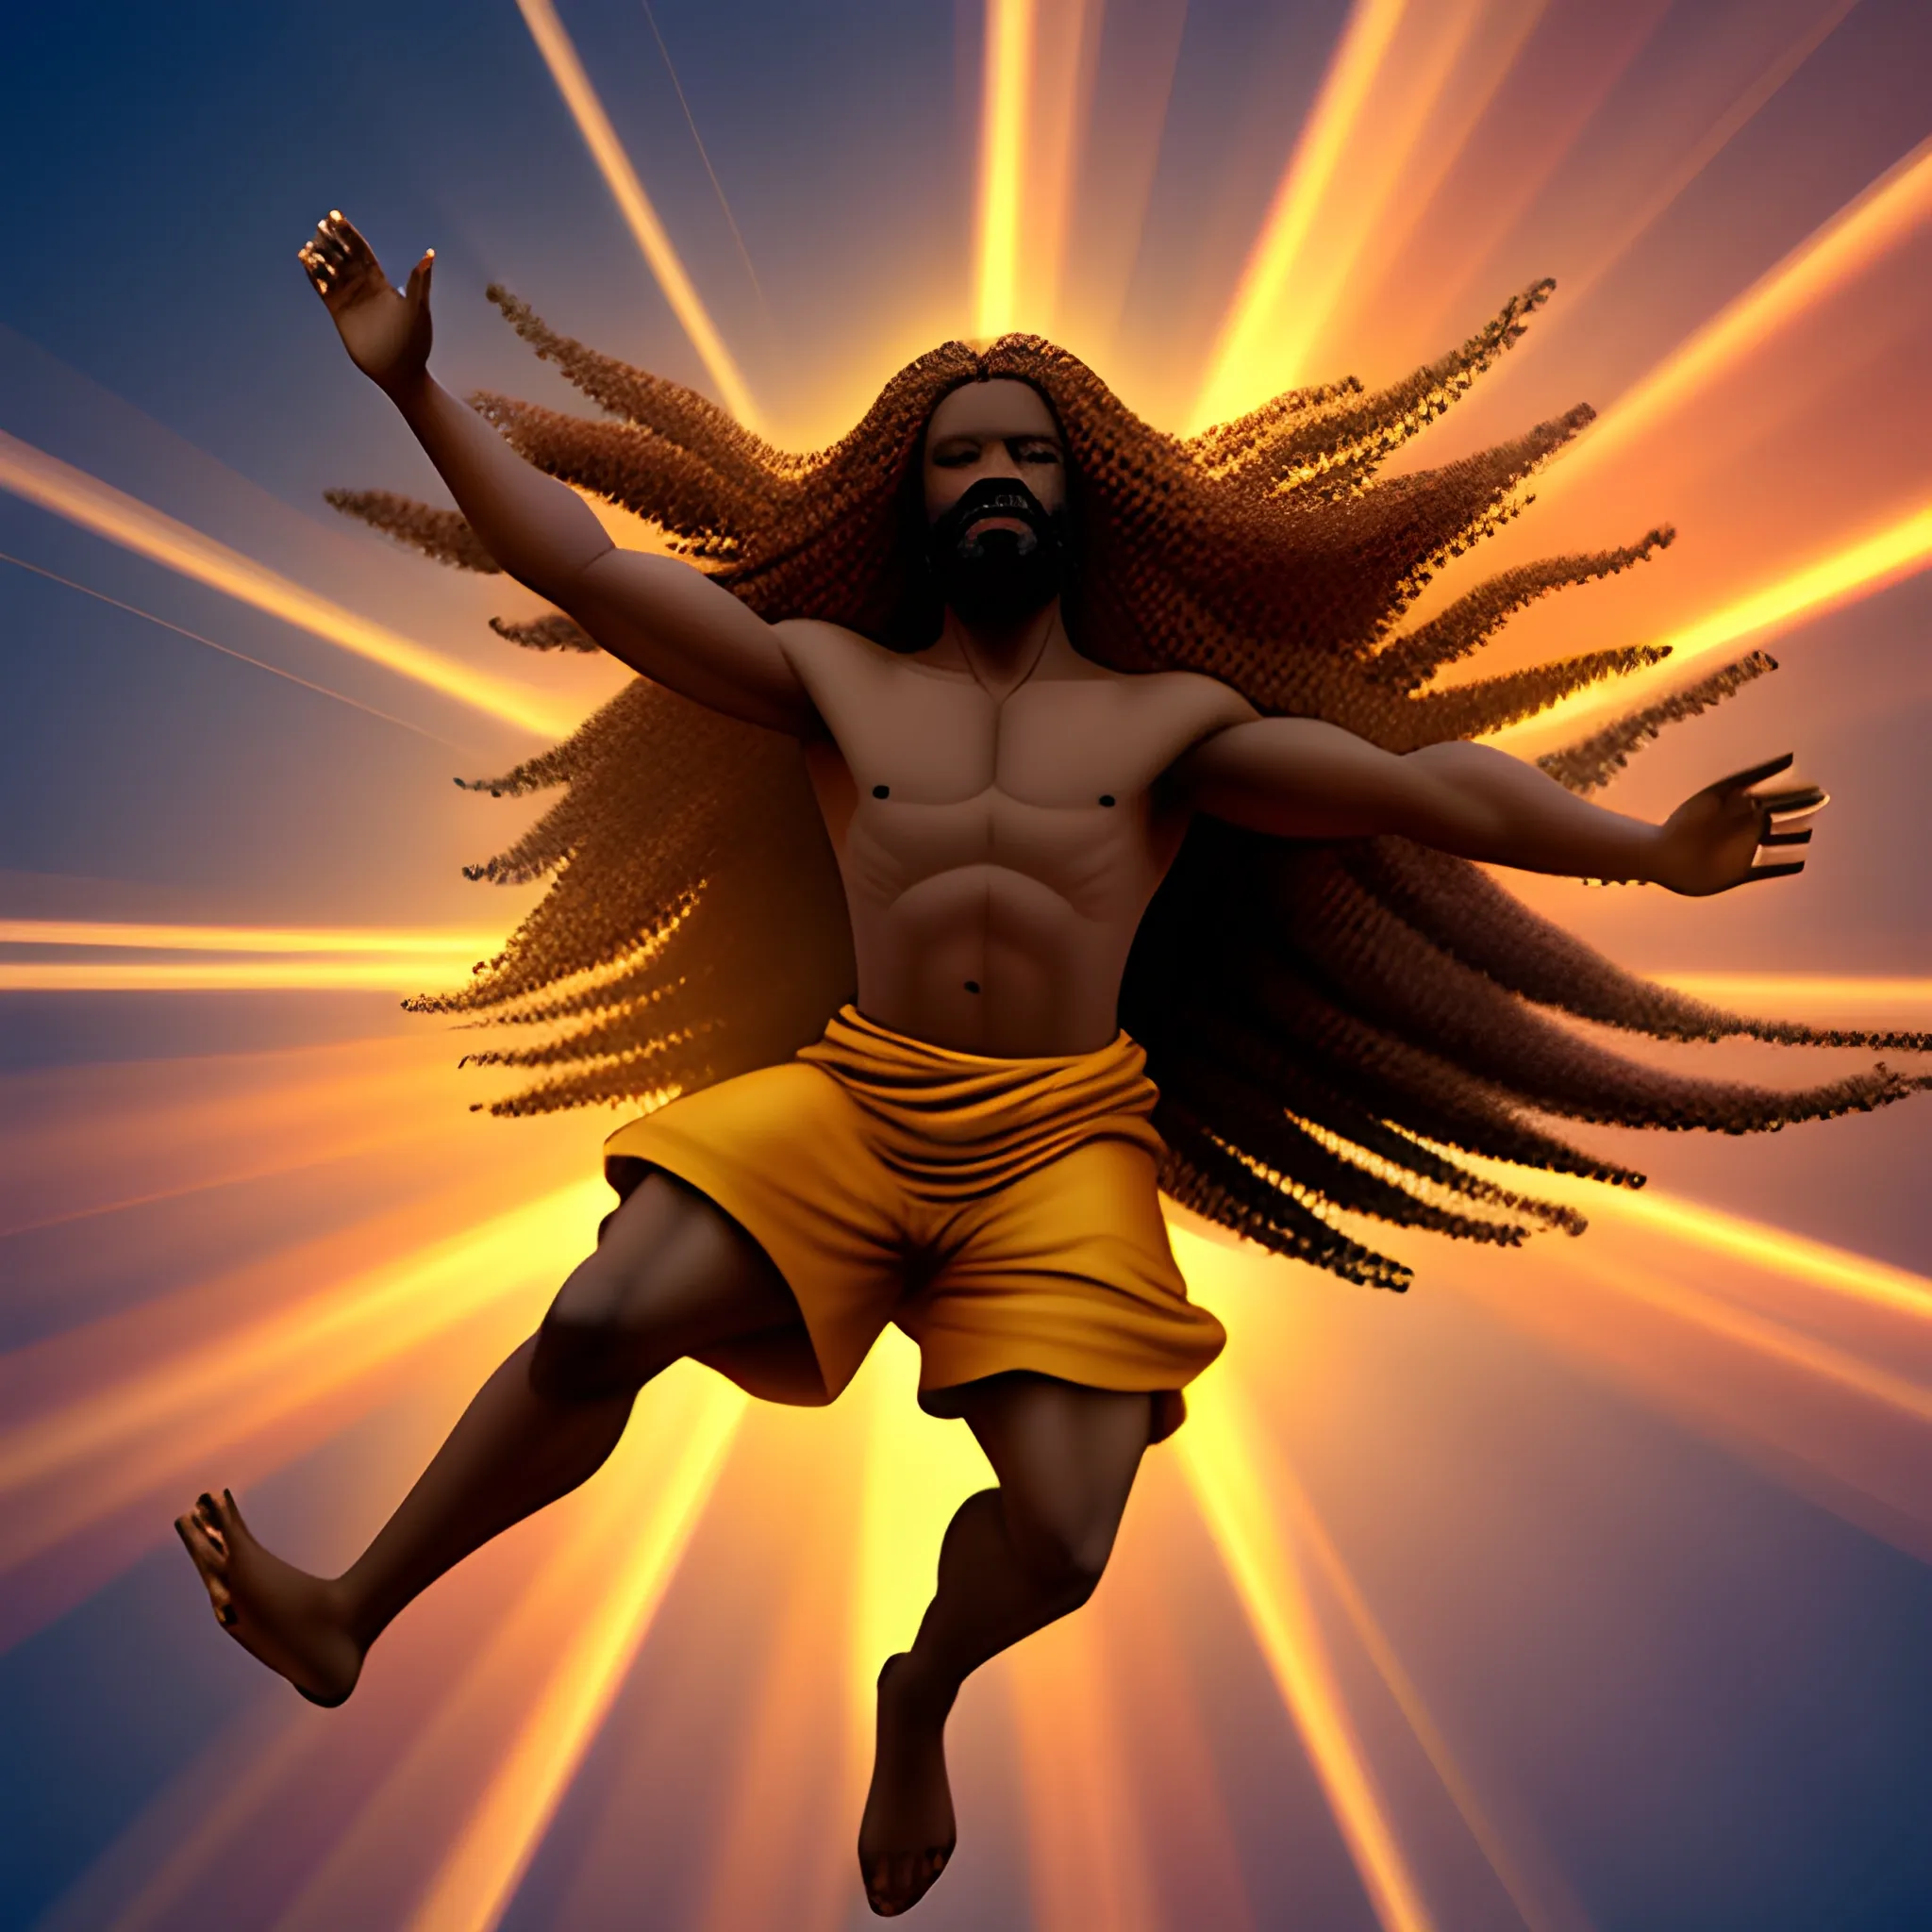 African American Jesus with brown skin and long golden hair surrounded by light flying into the sky full of beautiful colors and hand of GOD reaching down from a cloud, 3D